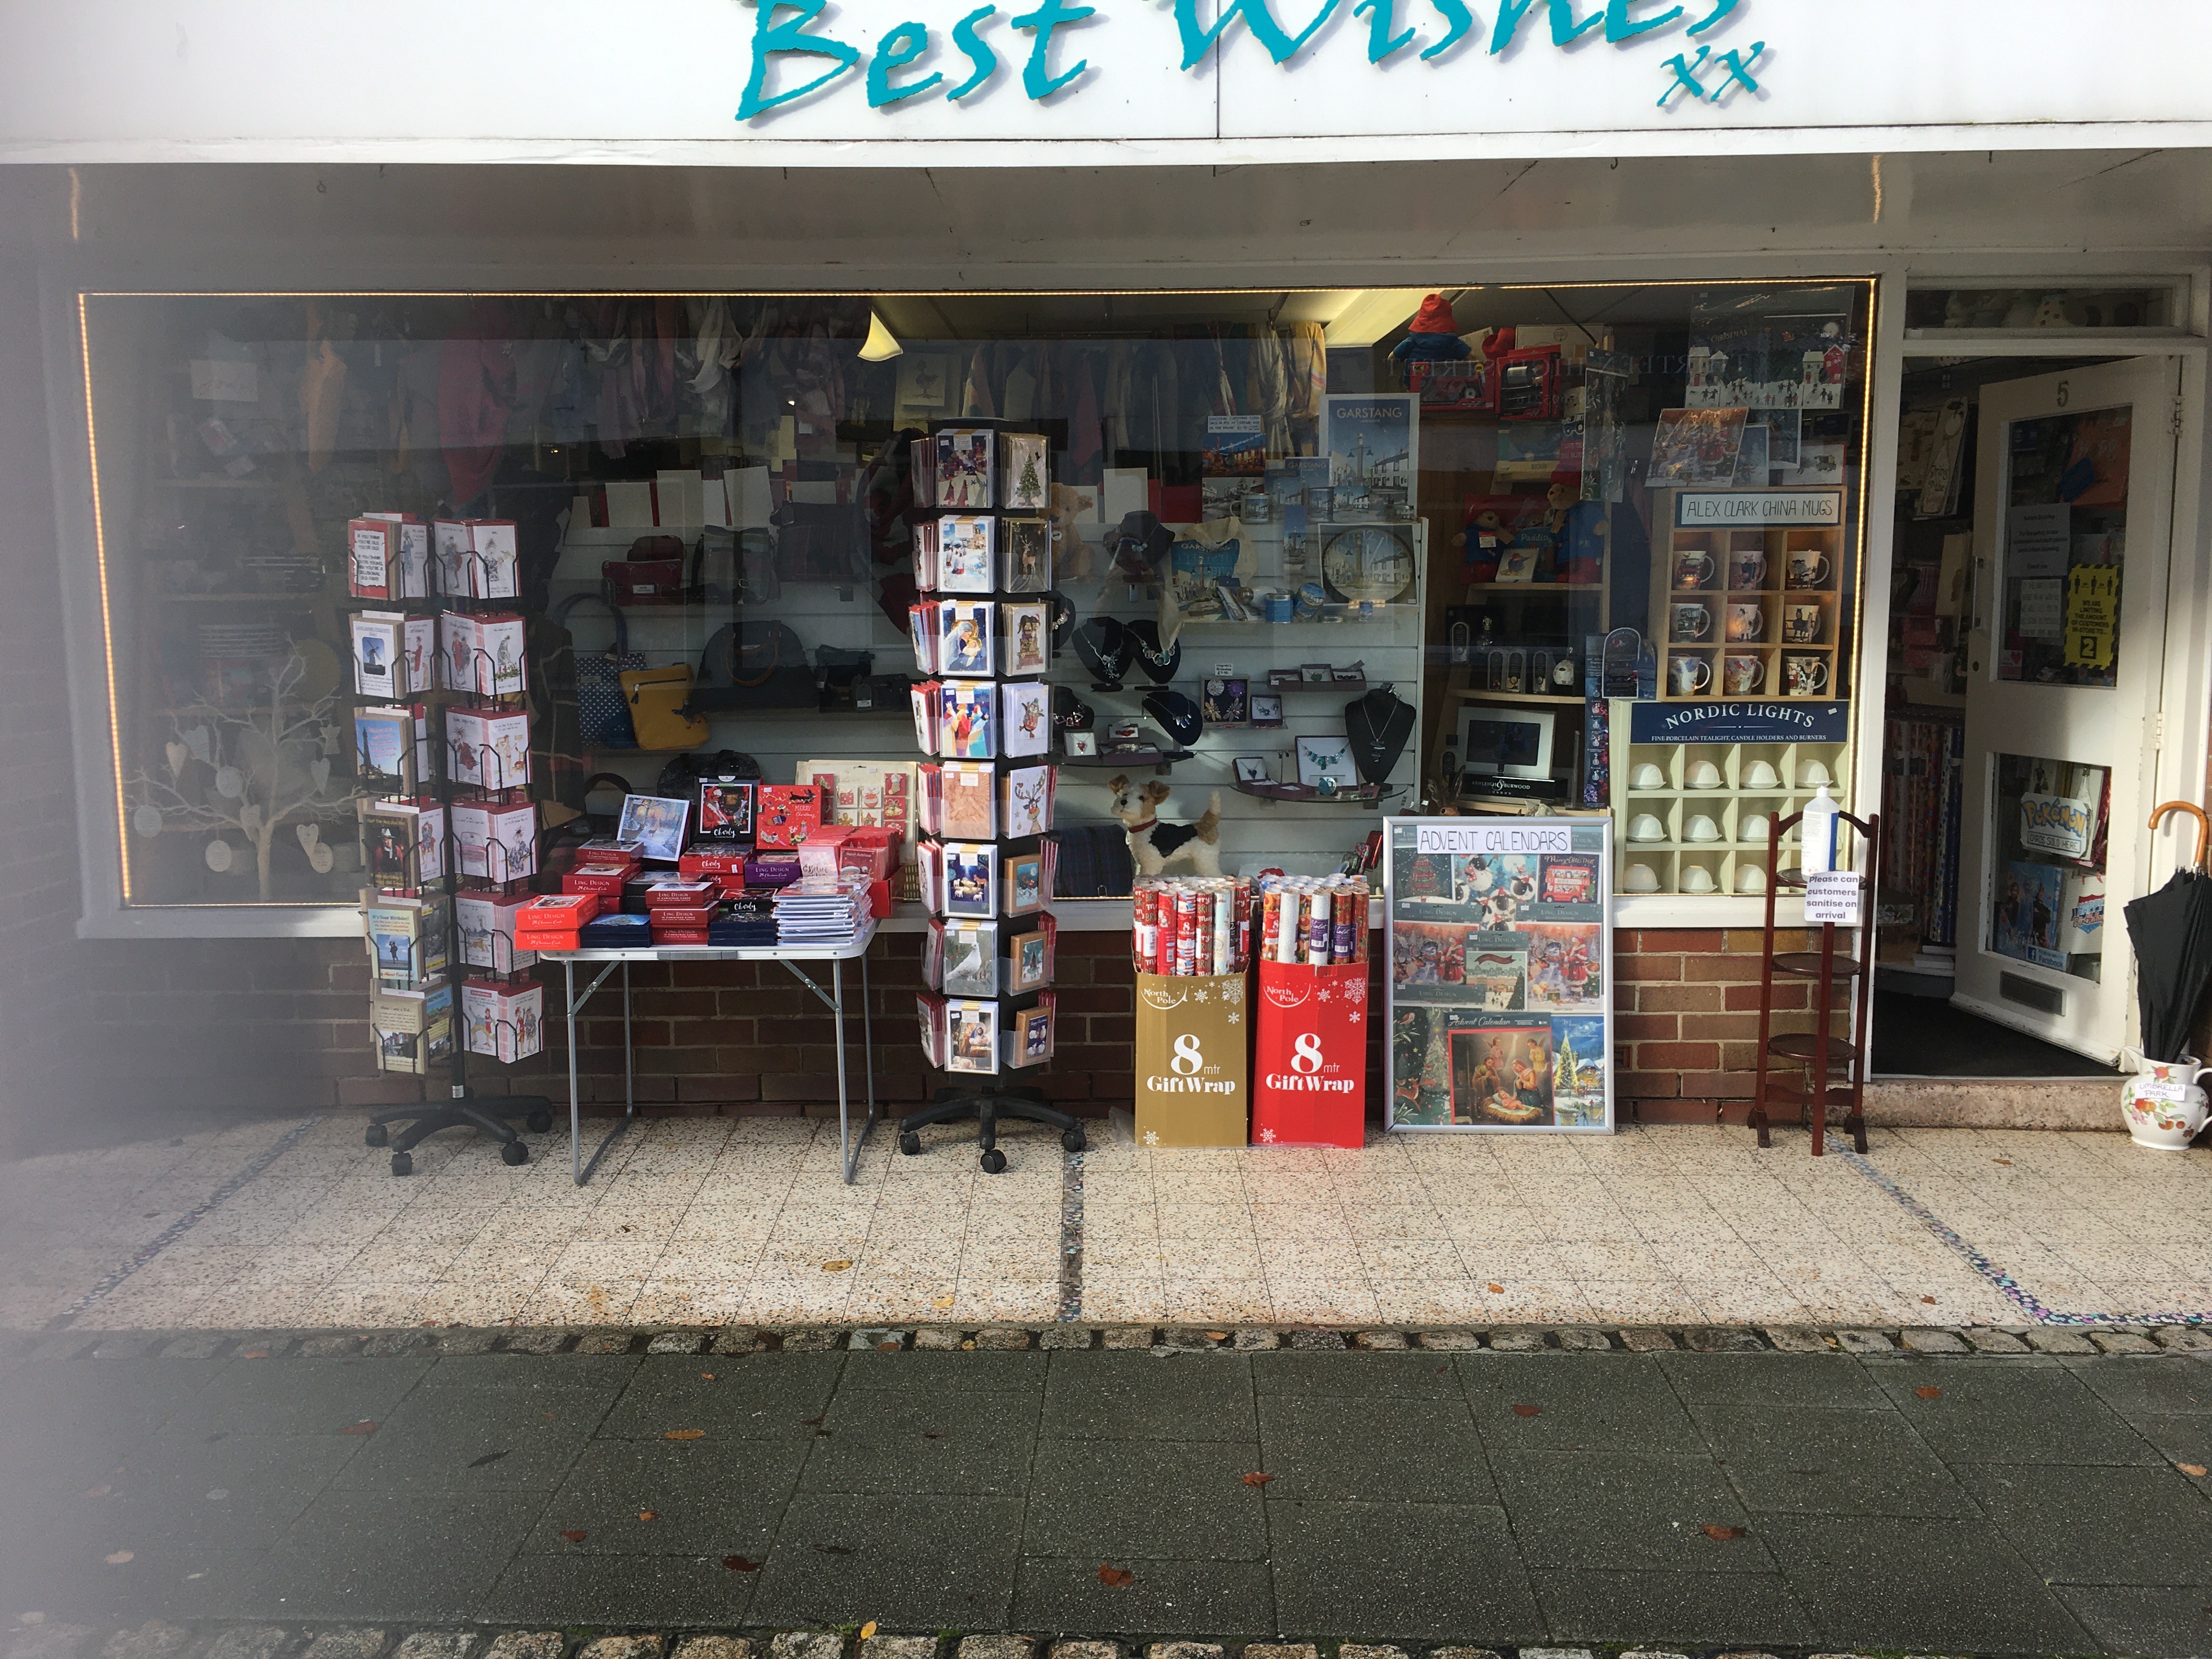 Above: Best Wishes extended its Christmas displays to outside the shop.